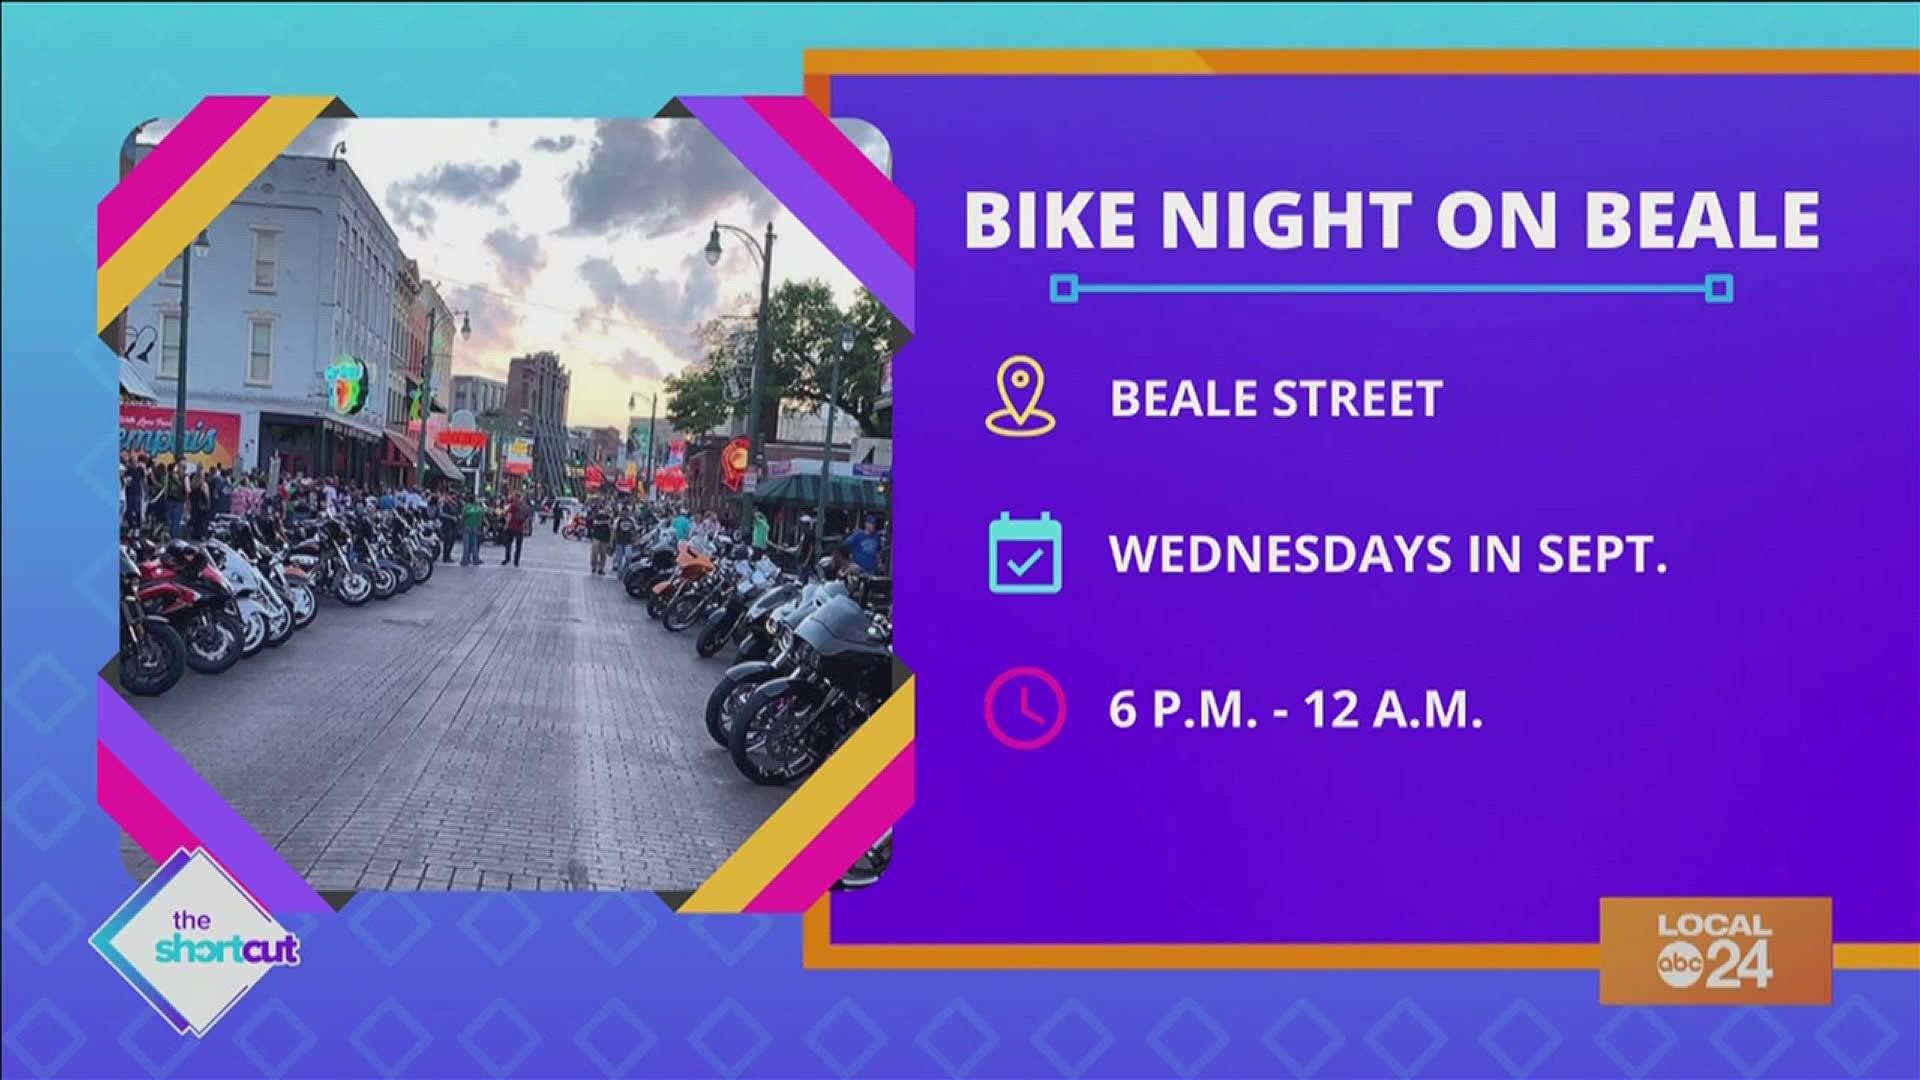 From biking on Beale Street to exploring the Botanic Gardens, check out the fun things to do in Memphis on Wednesday, September 2021 nights!